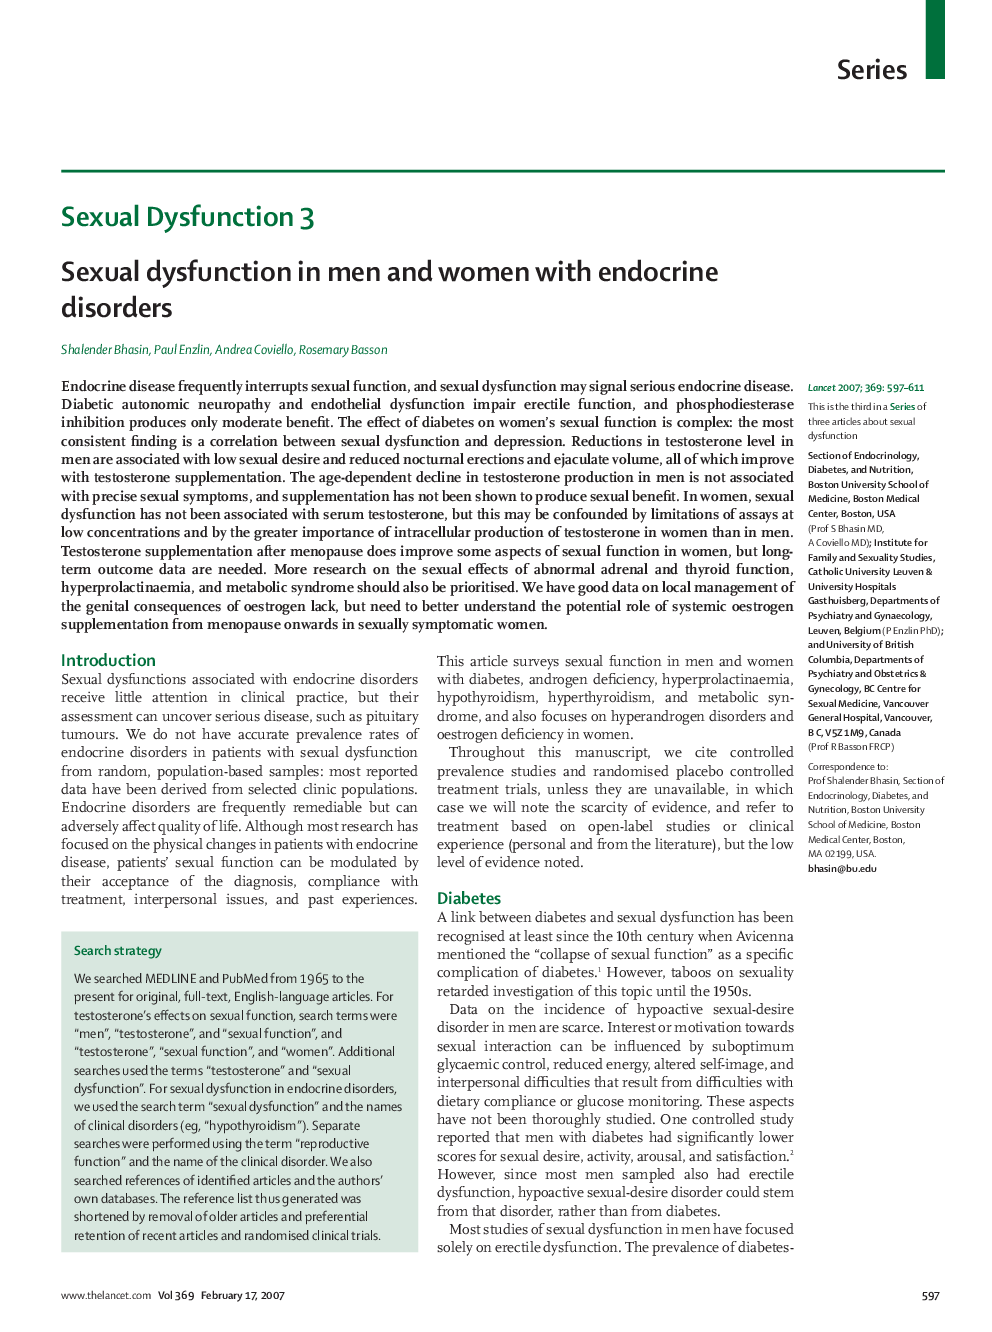 Sexual dysfunction in men and women with endocrine disorders 